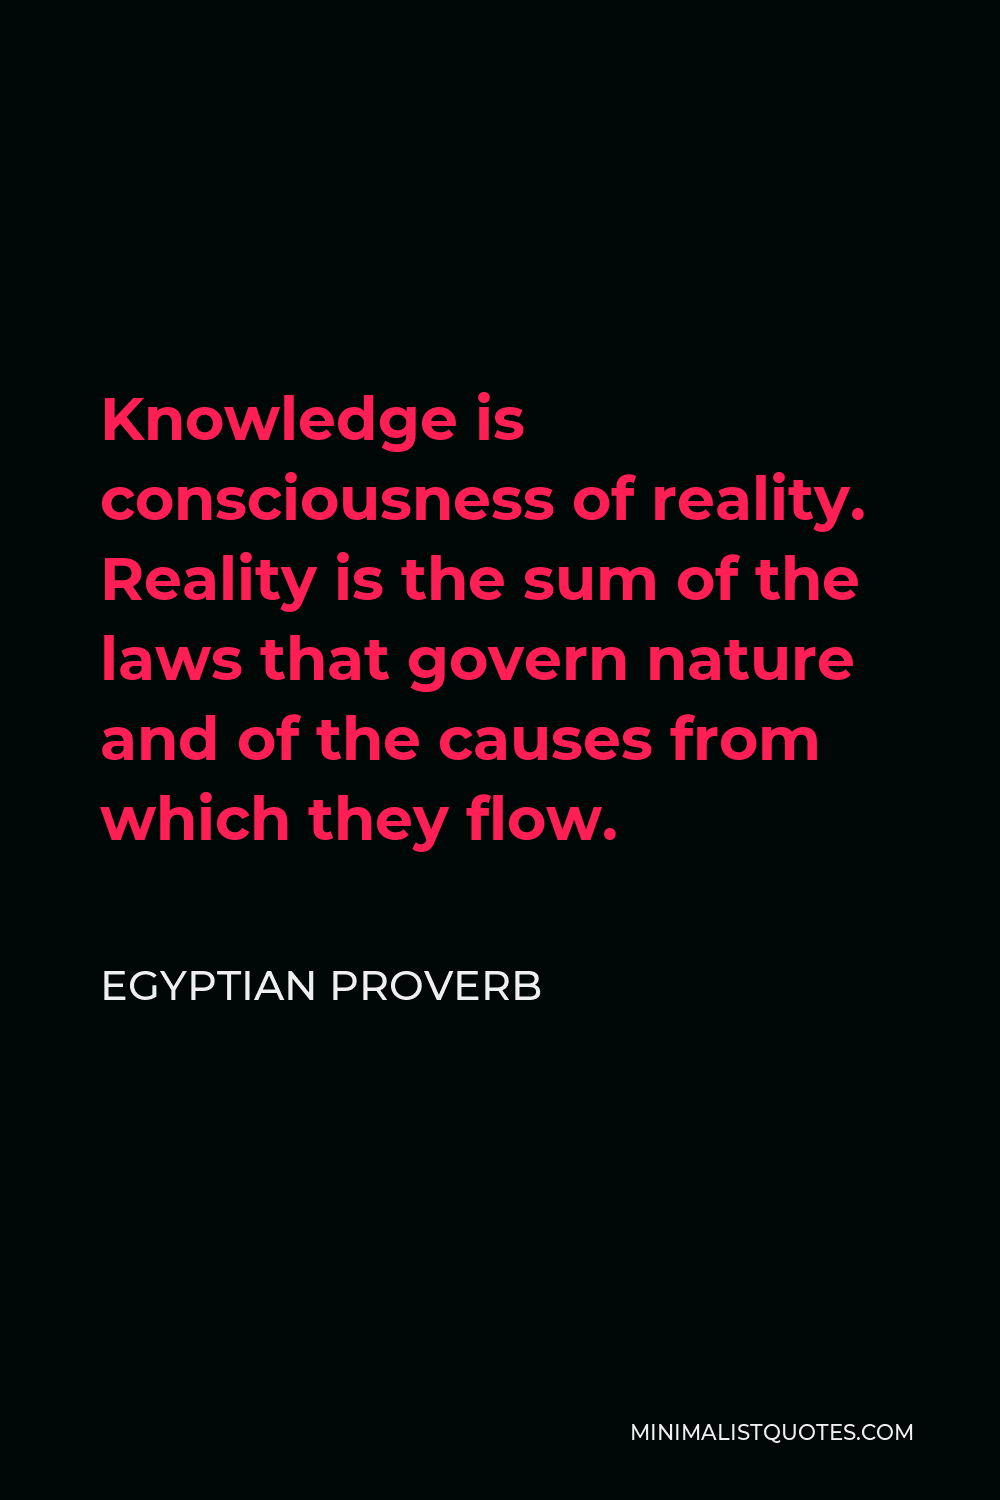 Egyptian Proverb Quote - Knowledge is consciousness of reality. Reality is the sum of the laws that govern nature and of the causes from which they flow.